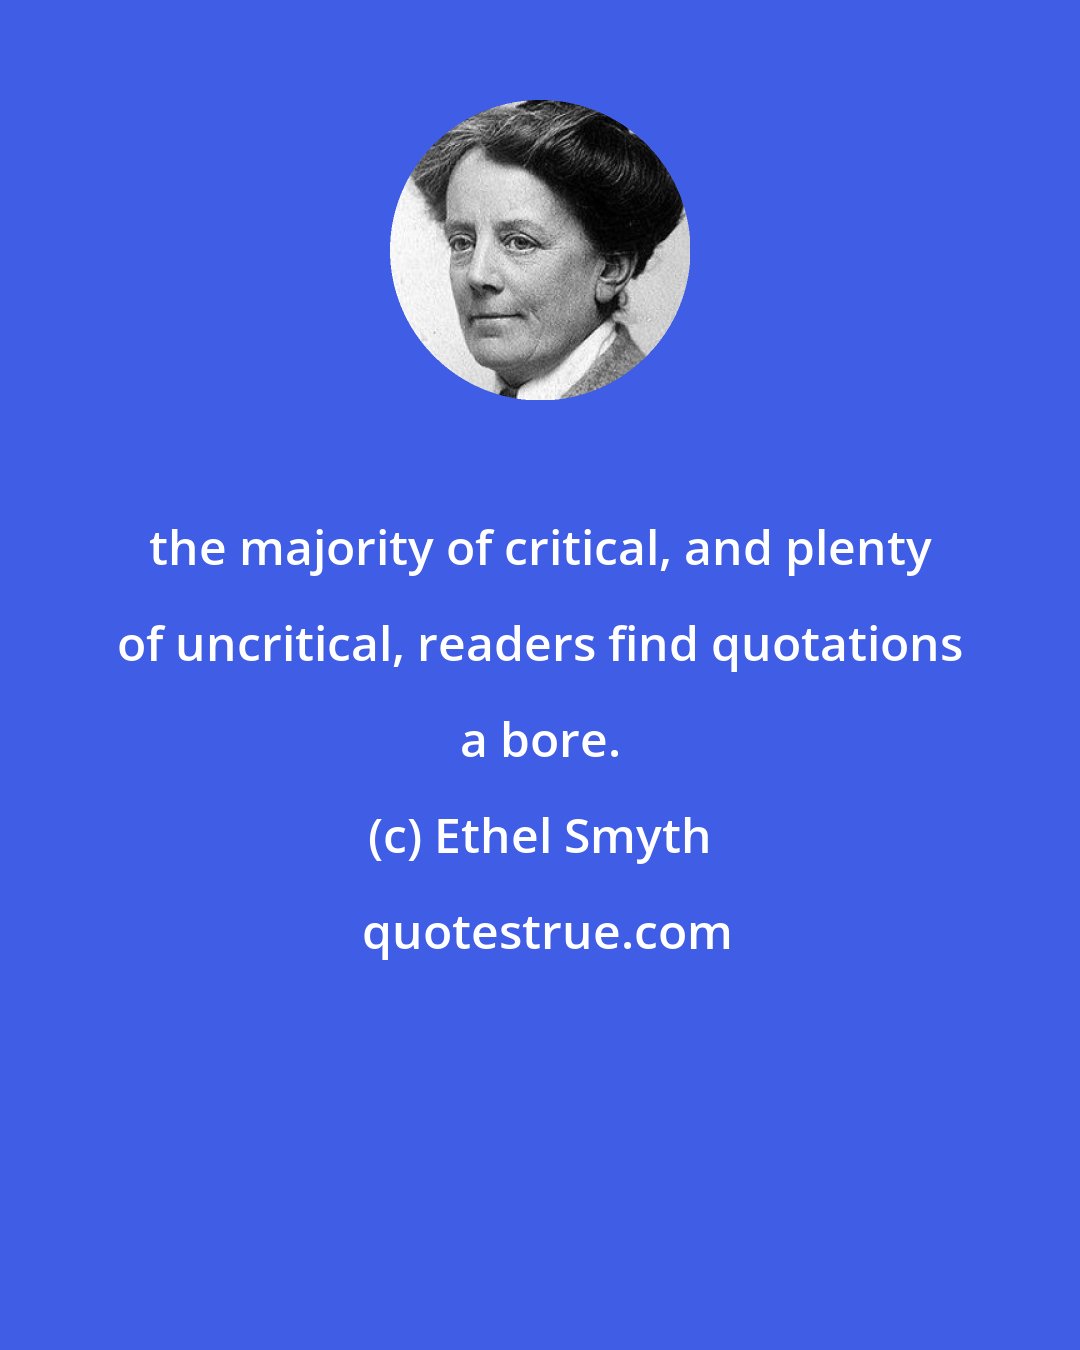 Ethel Smyth: the majority of critical, and plenty of uncritical, readers find quotations a bore.